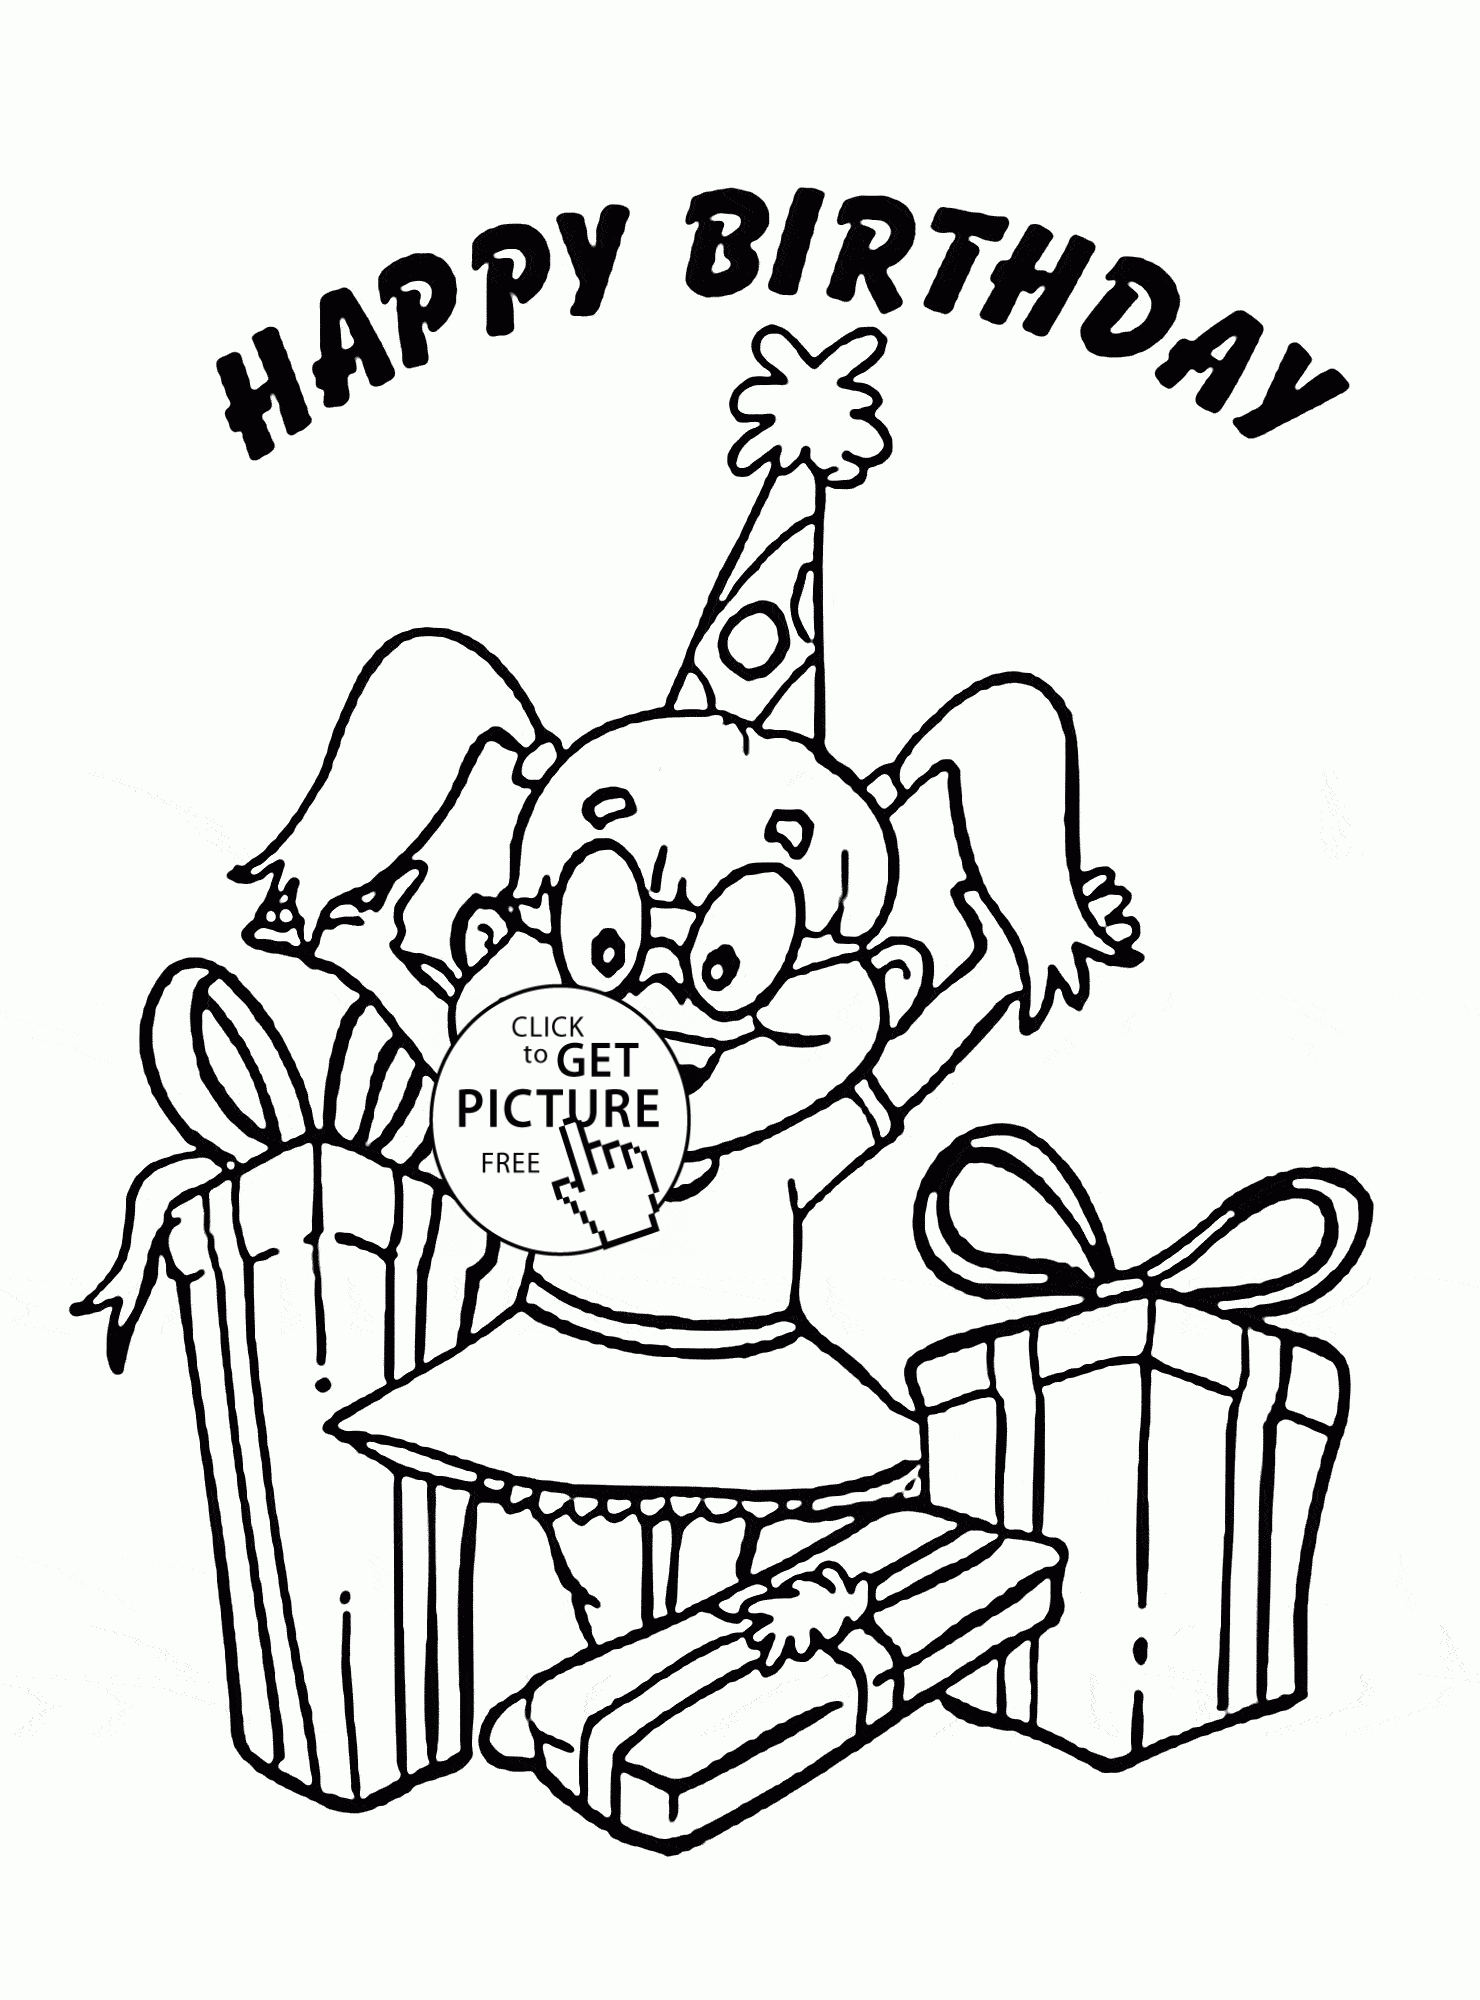 Happy Birthday Girl Coloring Page For Kids, Holiday Coloring Pages - Free Printable Birthday Cards To Color